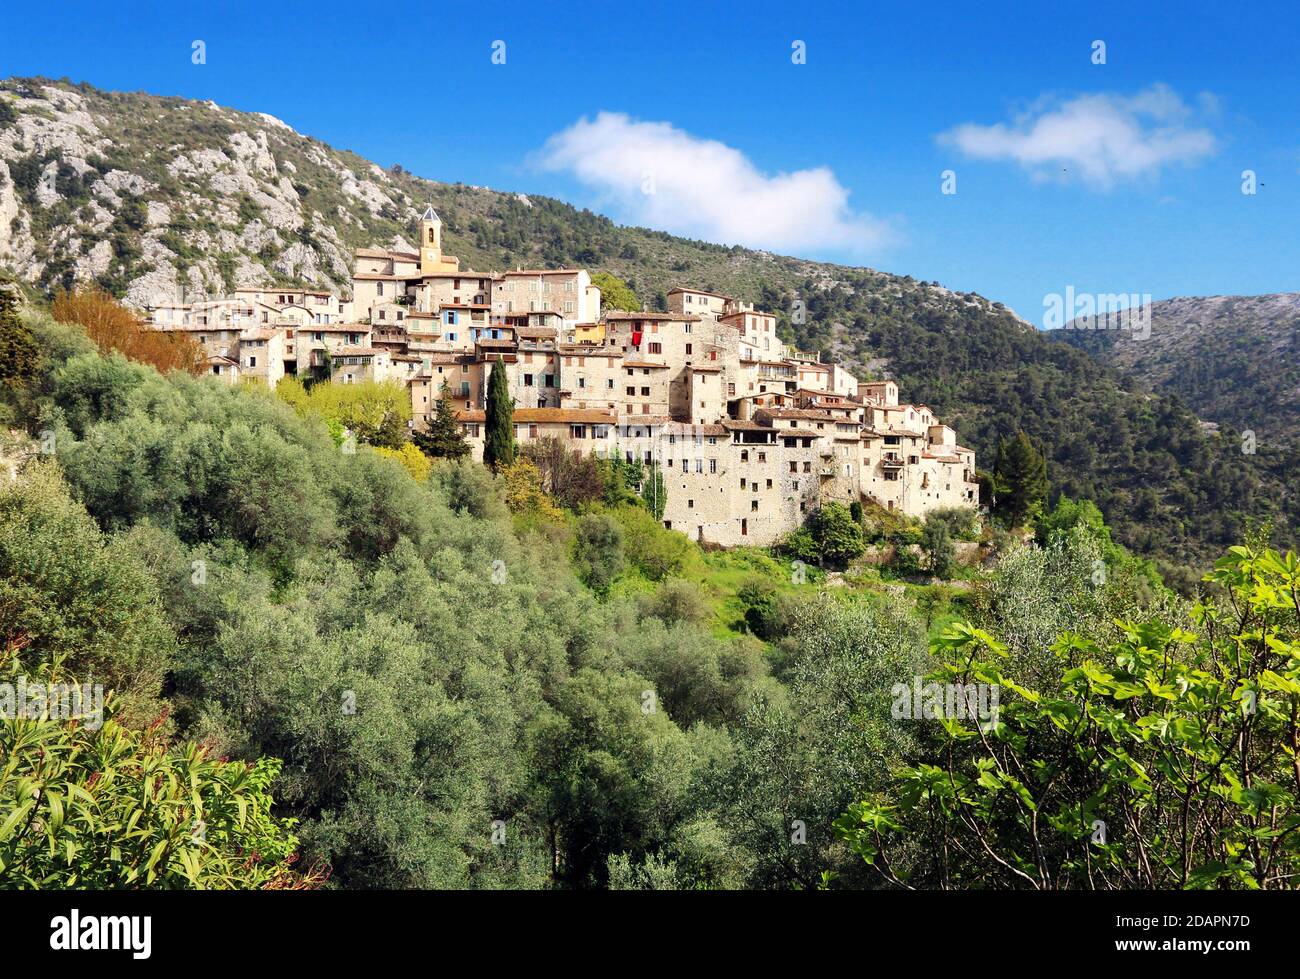 The perched village of Peillon in the hills of the French Riviera, near Menton. Stock Photo